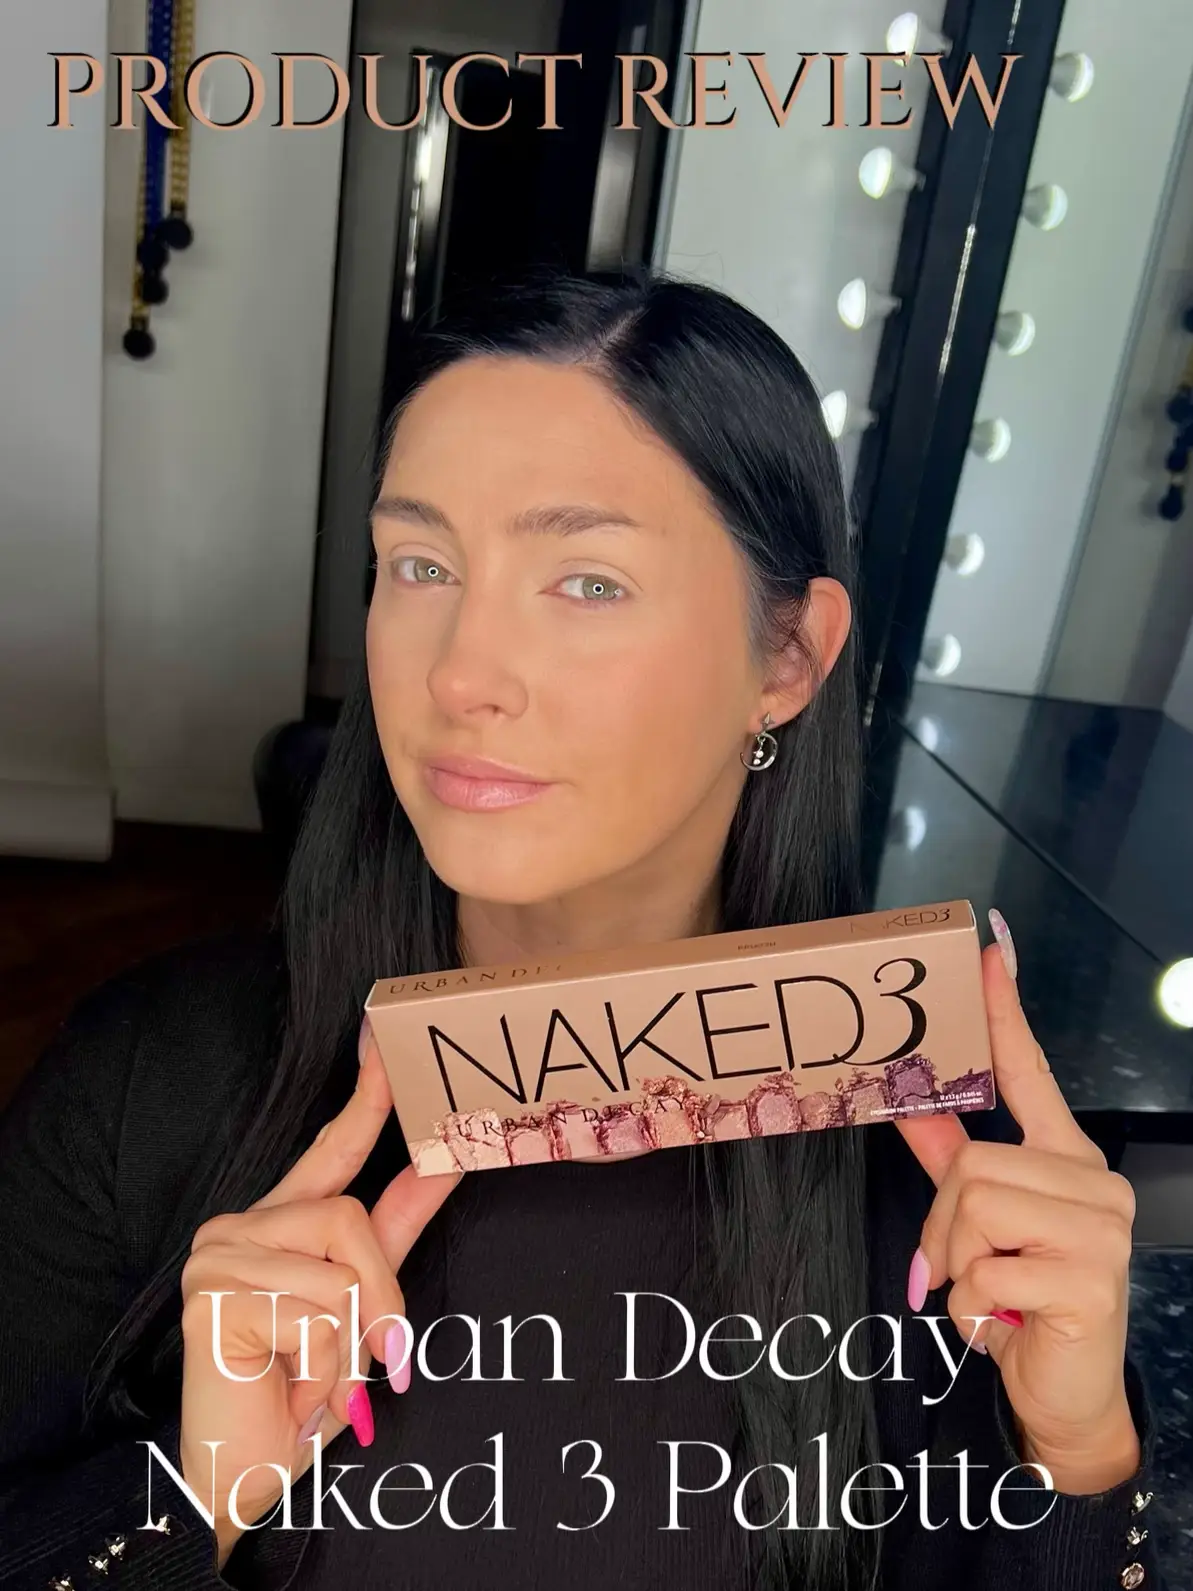 Urban Decay Naked 3 Eyeshadow Palette 